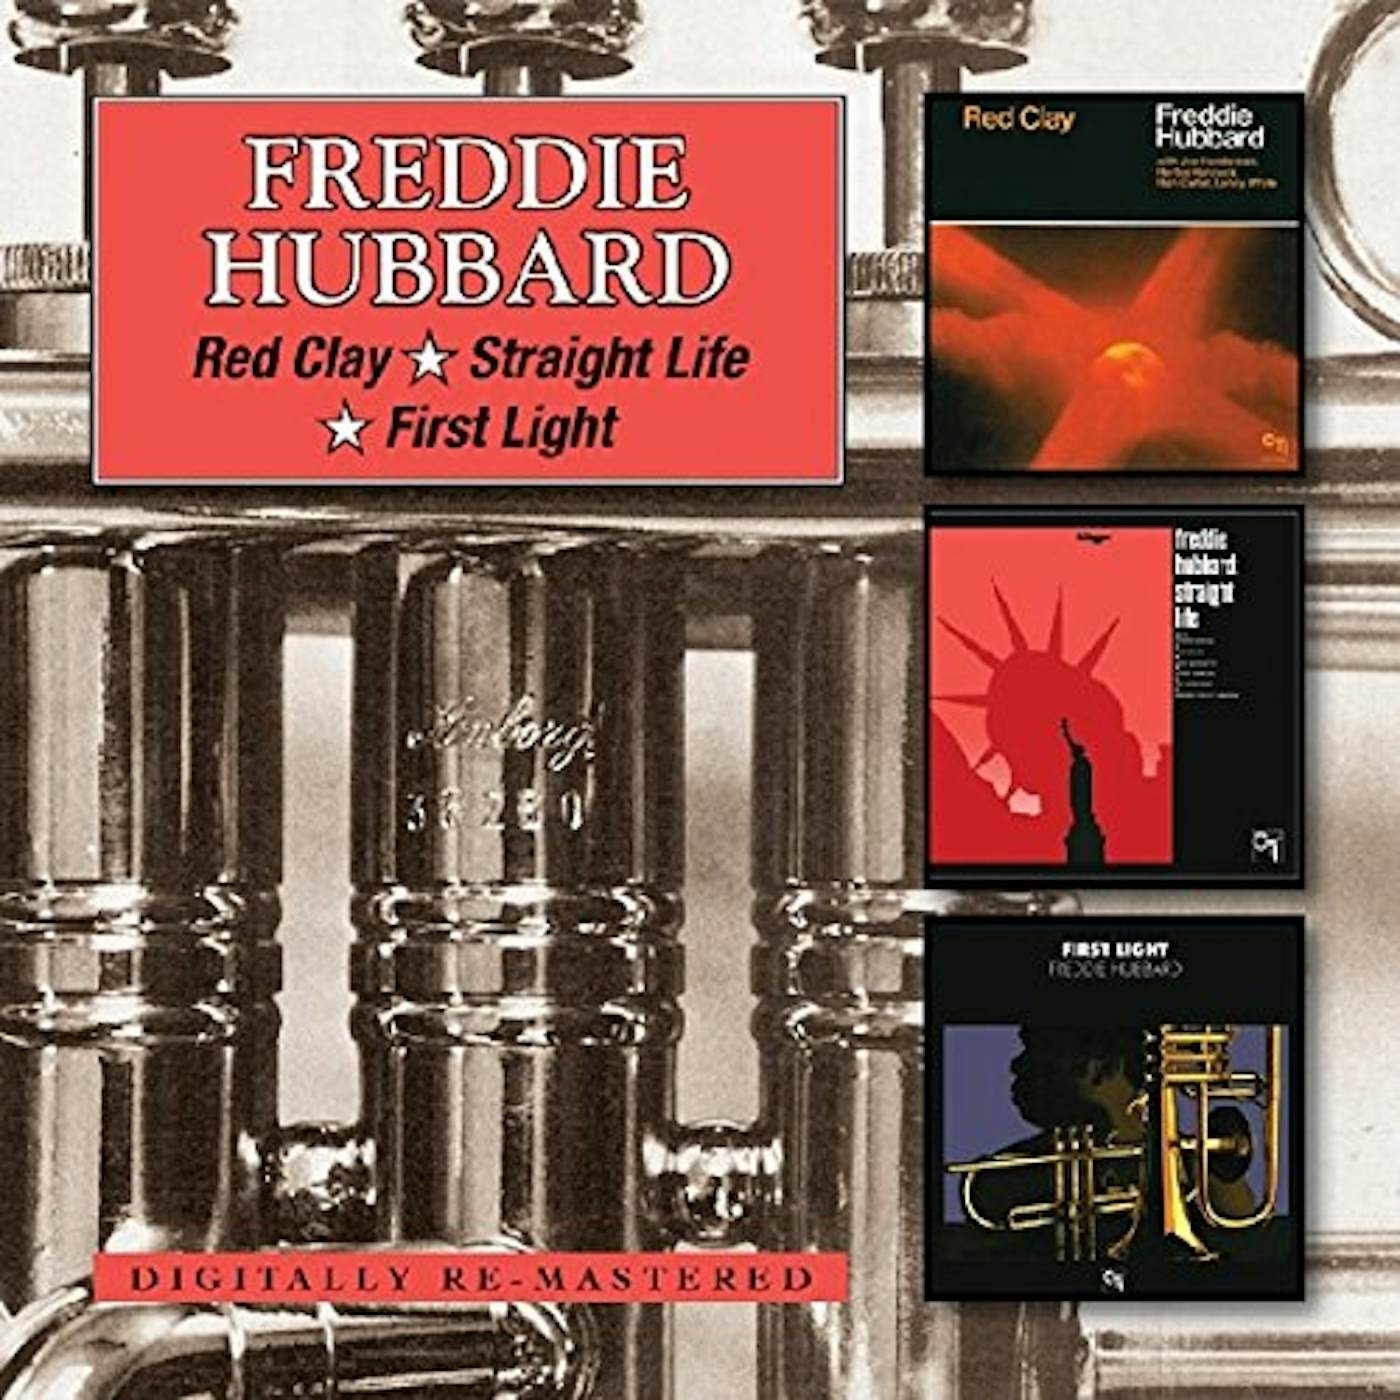 Freddie Hubbard RED CLAY/STRAIGHT LIFE/FIRST LIGHT CD